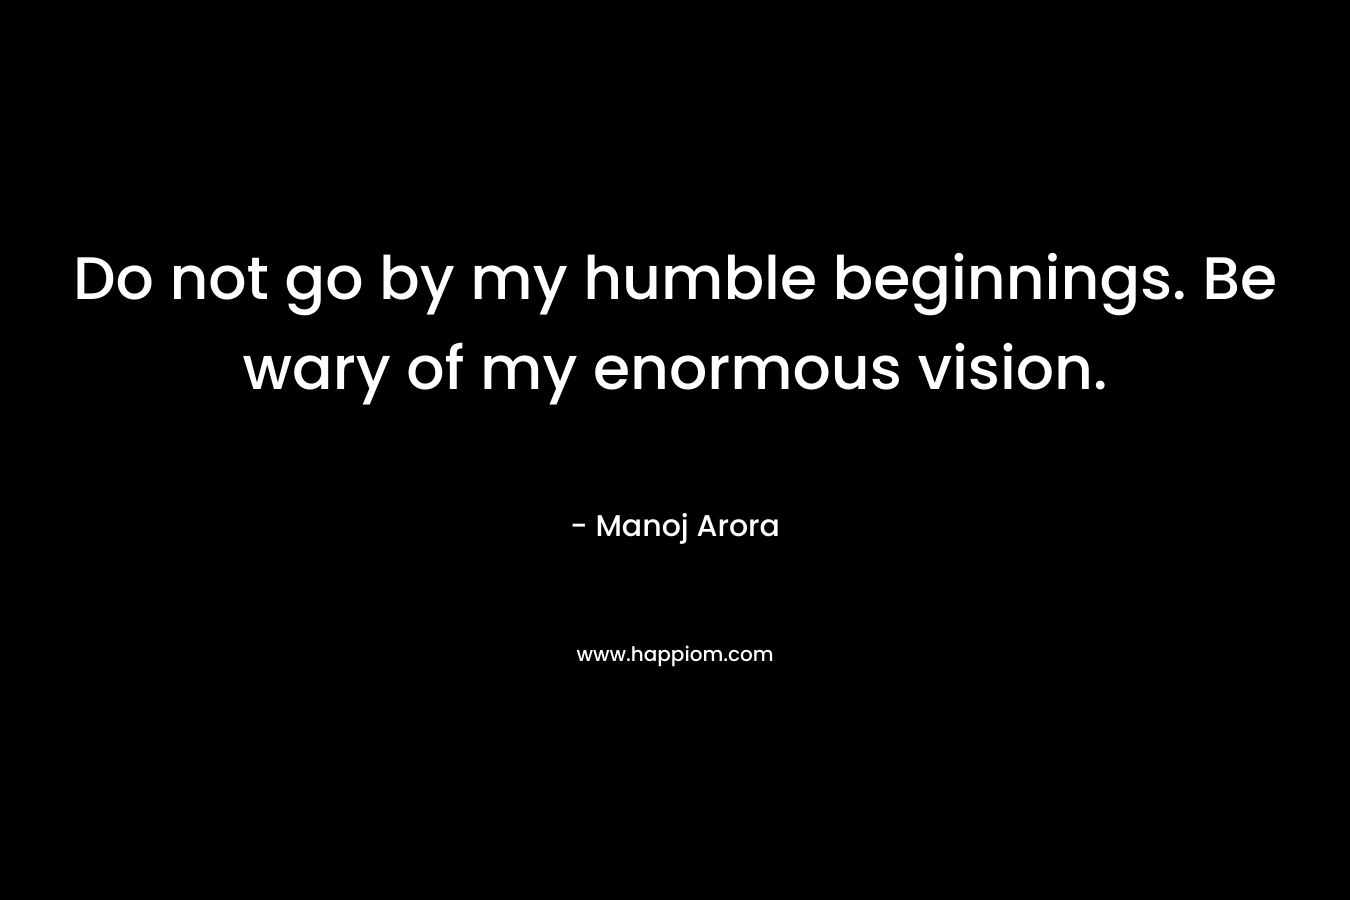 Do not go by my humble beginnings. Be wary of my enormous vision. – Manoj Arora